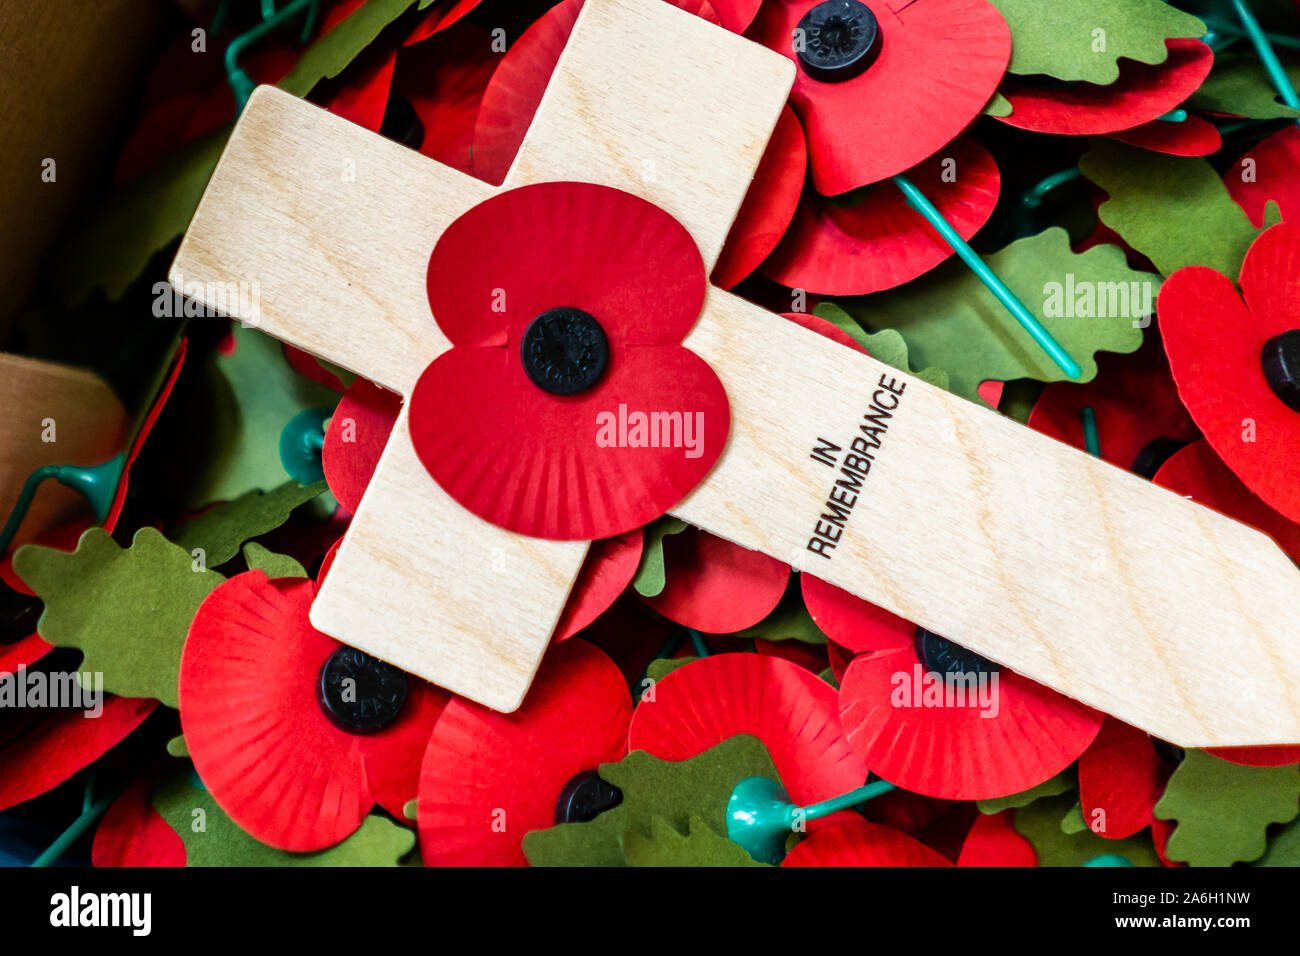 Poppies on Crosses for the Royal British Legion Poppy Appeal are collected at a secret location and counted by volunteers, in remembrance, RBL, Poppy Stock Photo